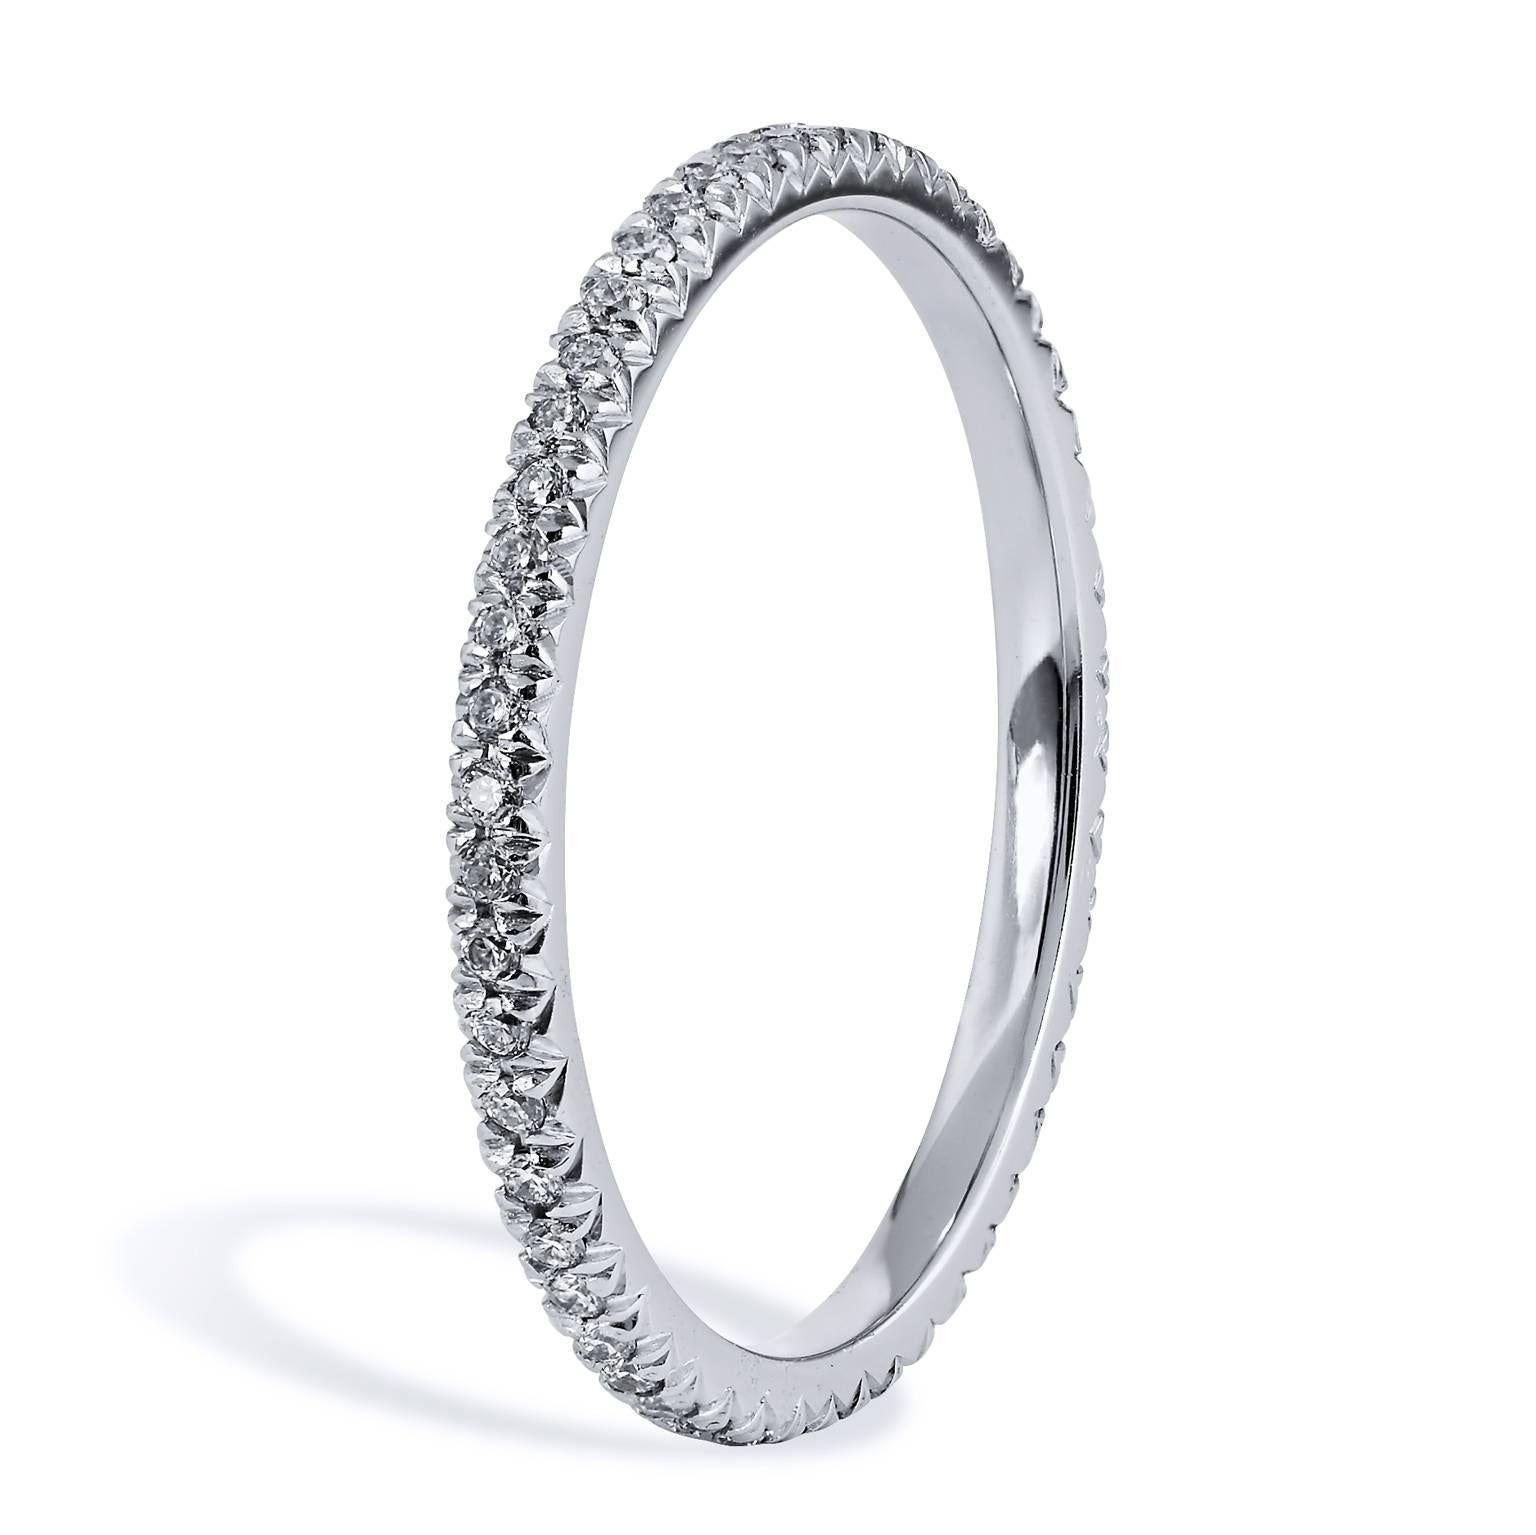 This diamond band ring features fifty-one pieces of diamond pave set with a total weight of 0.20 carat (G/H/VS). Affixed to a 1.5 mm platinum band, the split V detail, opens the eye, allows the ring to pop with light.